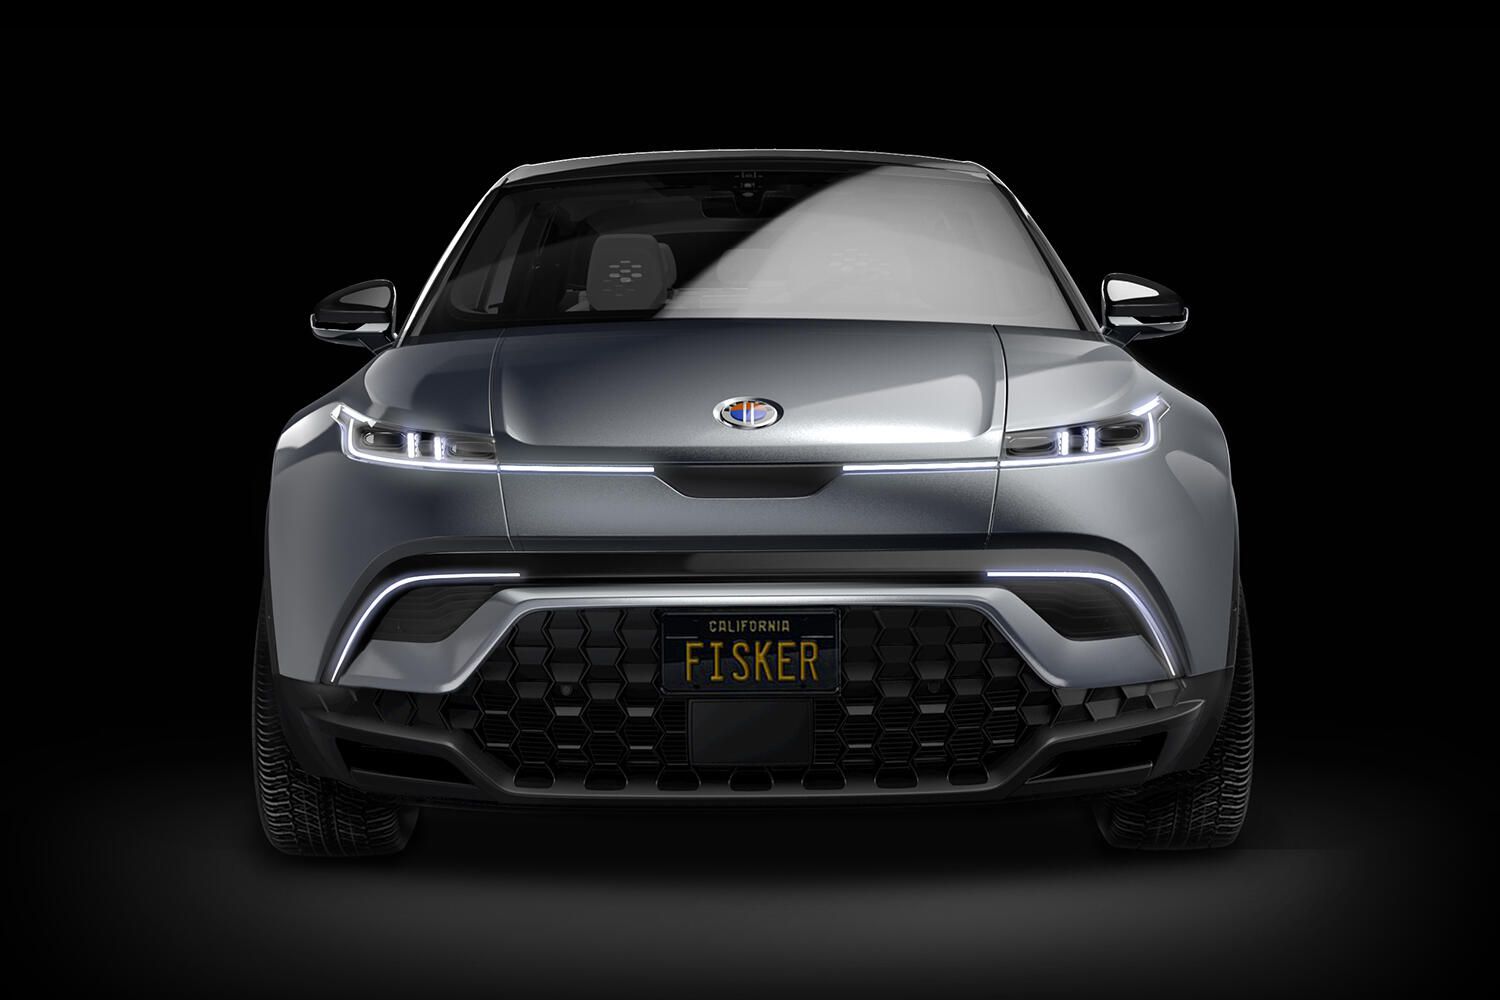 Fisker's electric SUV to be unveiled soon, start under $40,000